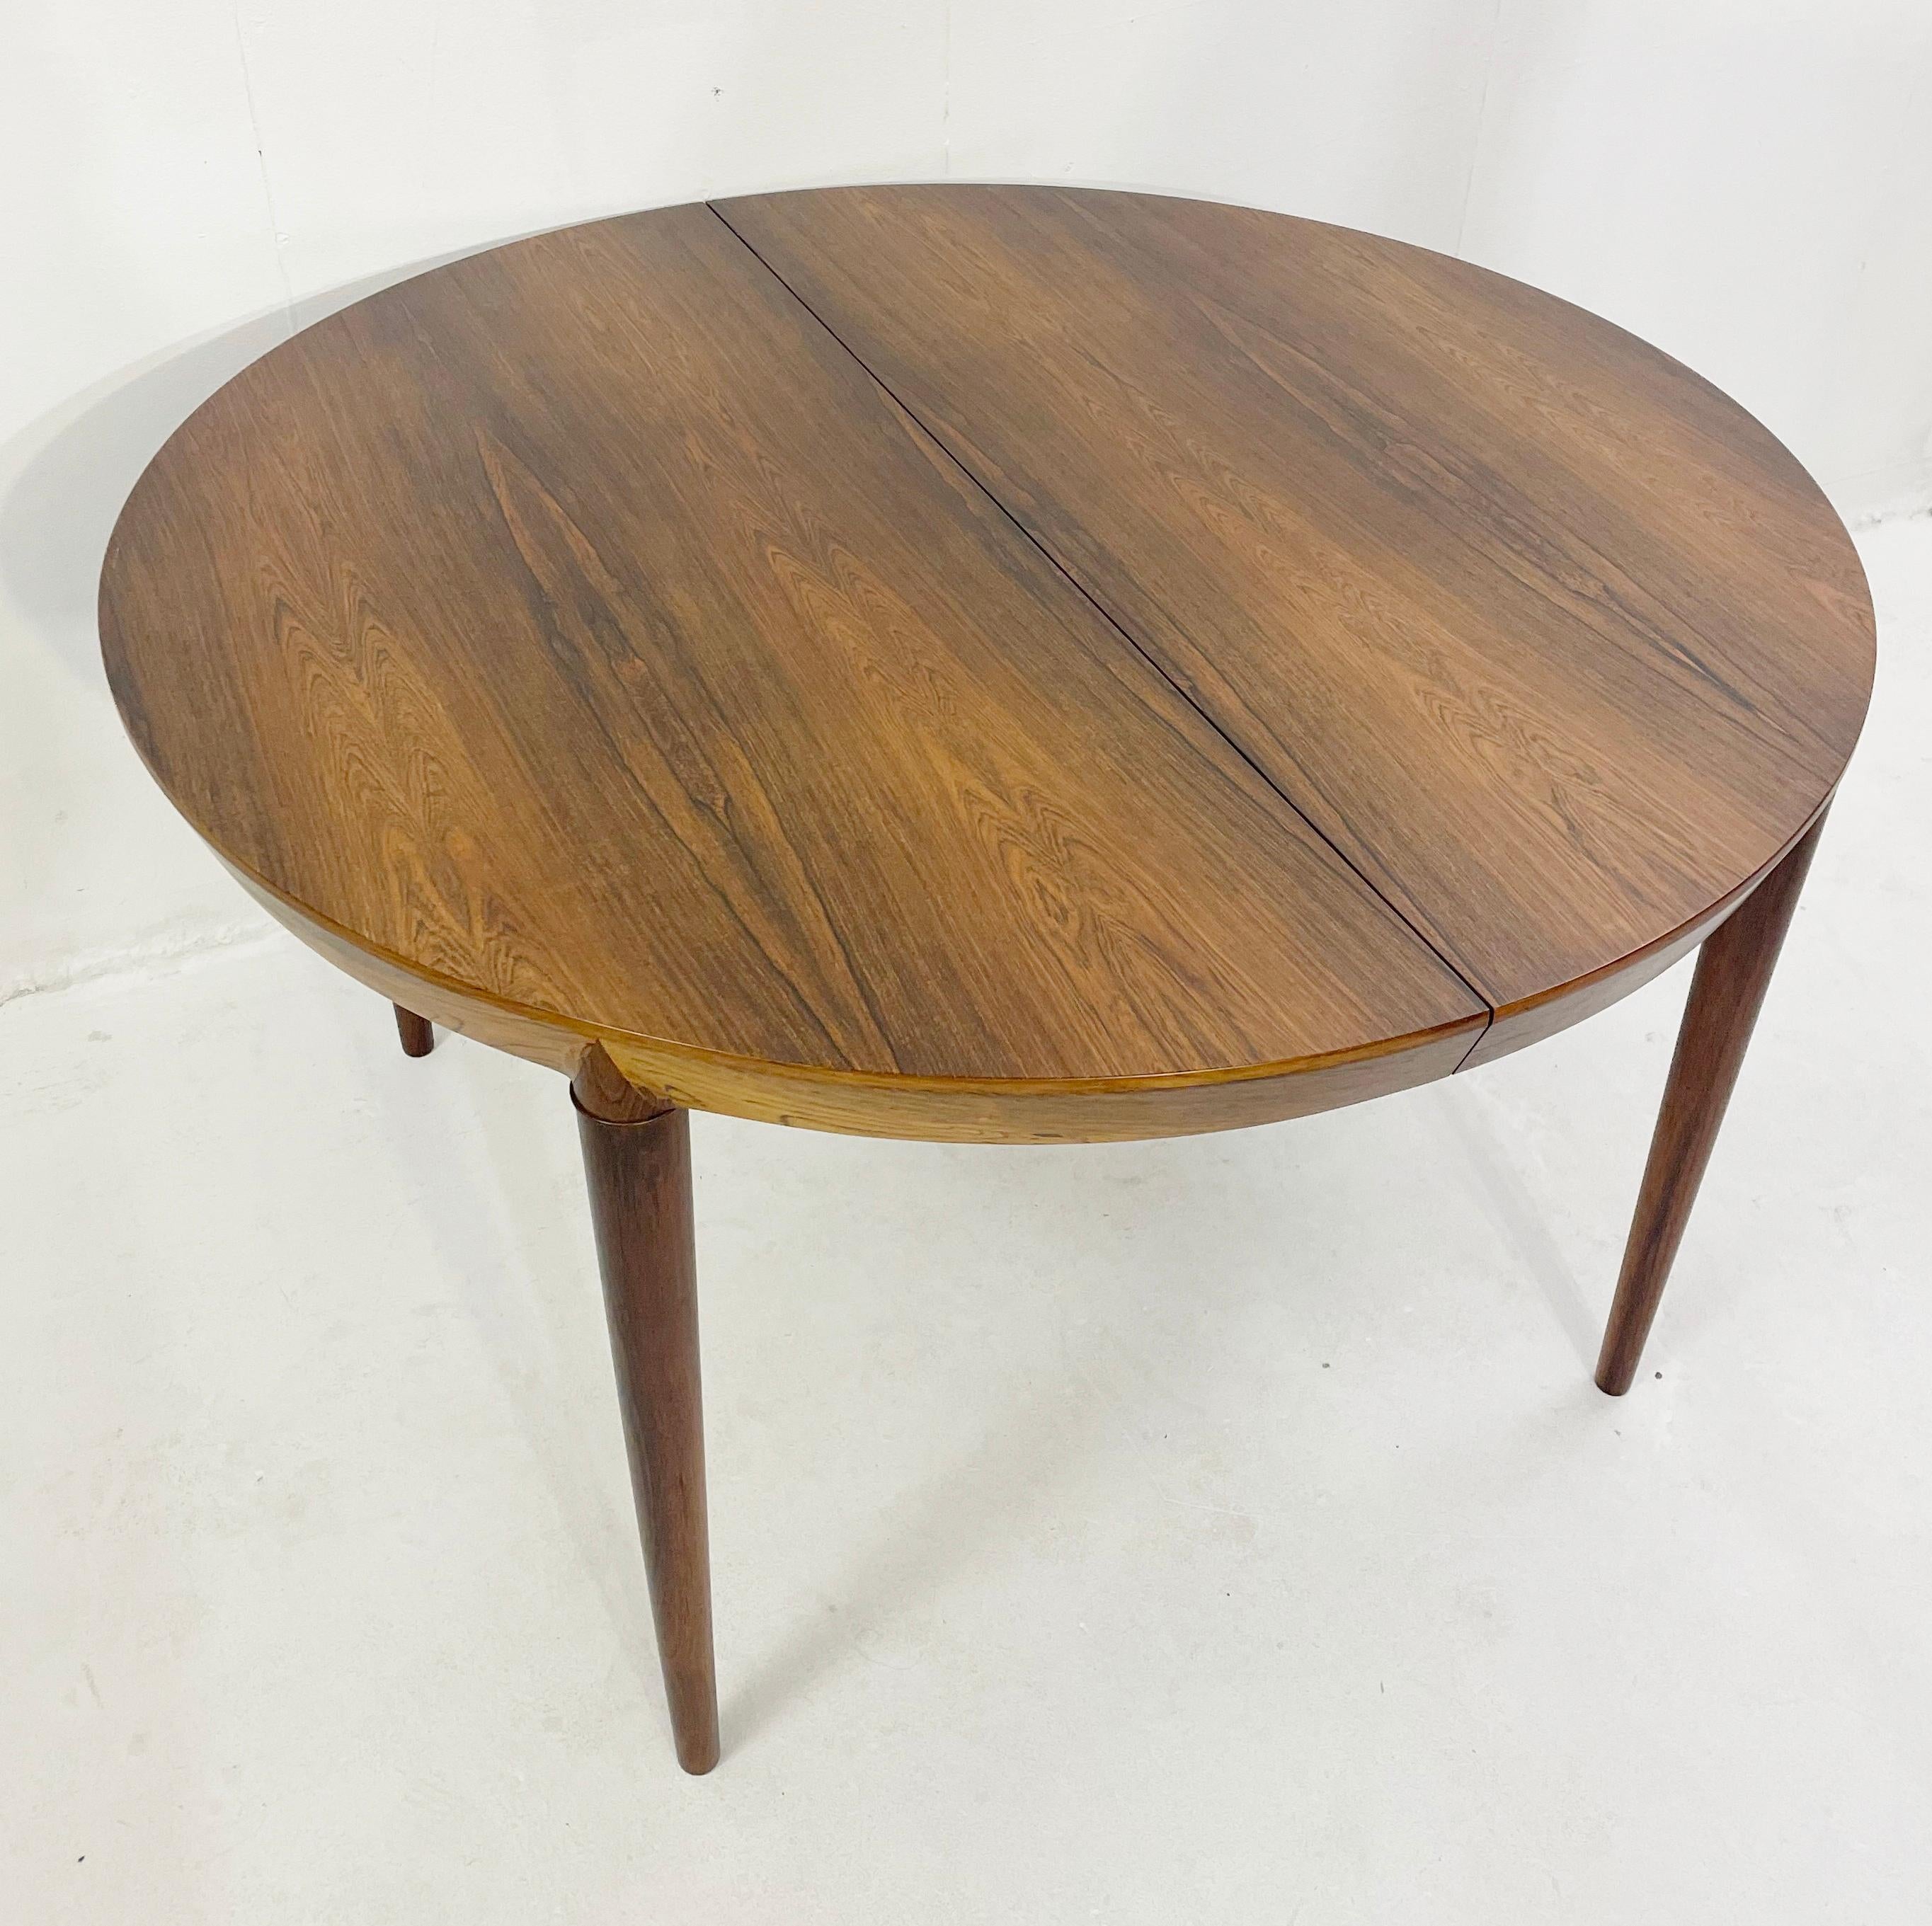 Danish Mid-Century Dining Table with 1 Extension by Severin Hansen, Denmark, 1960s